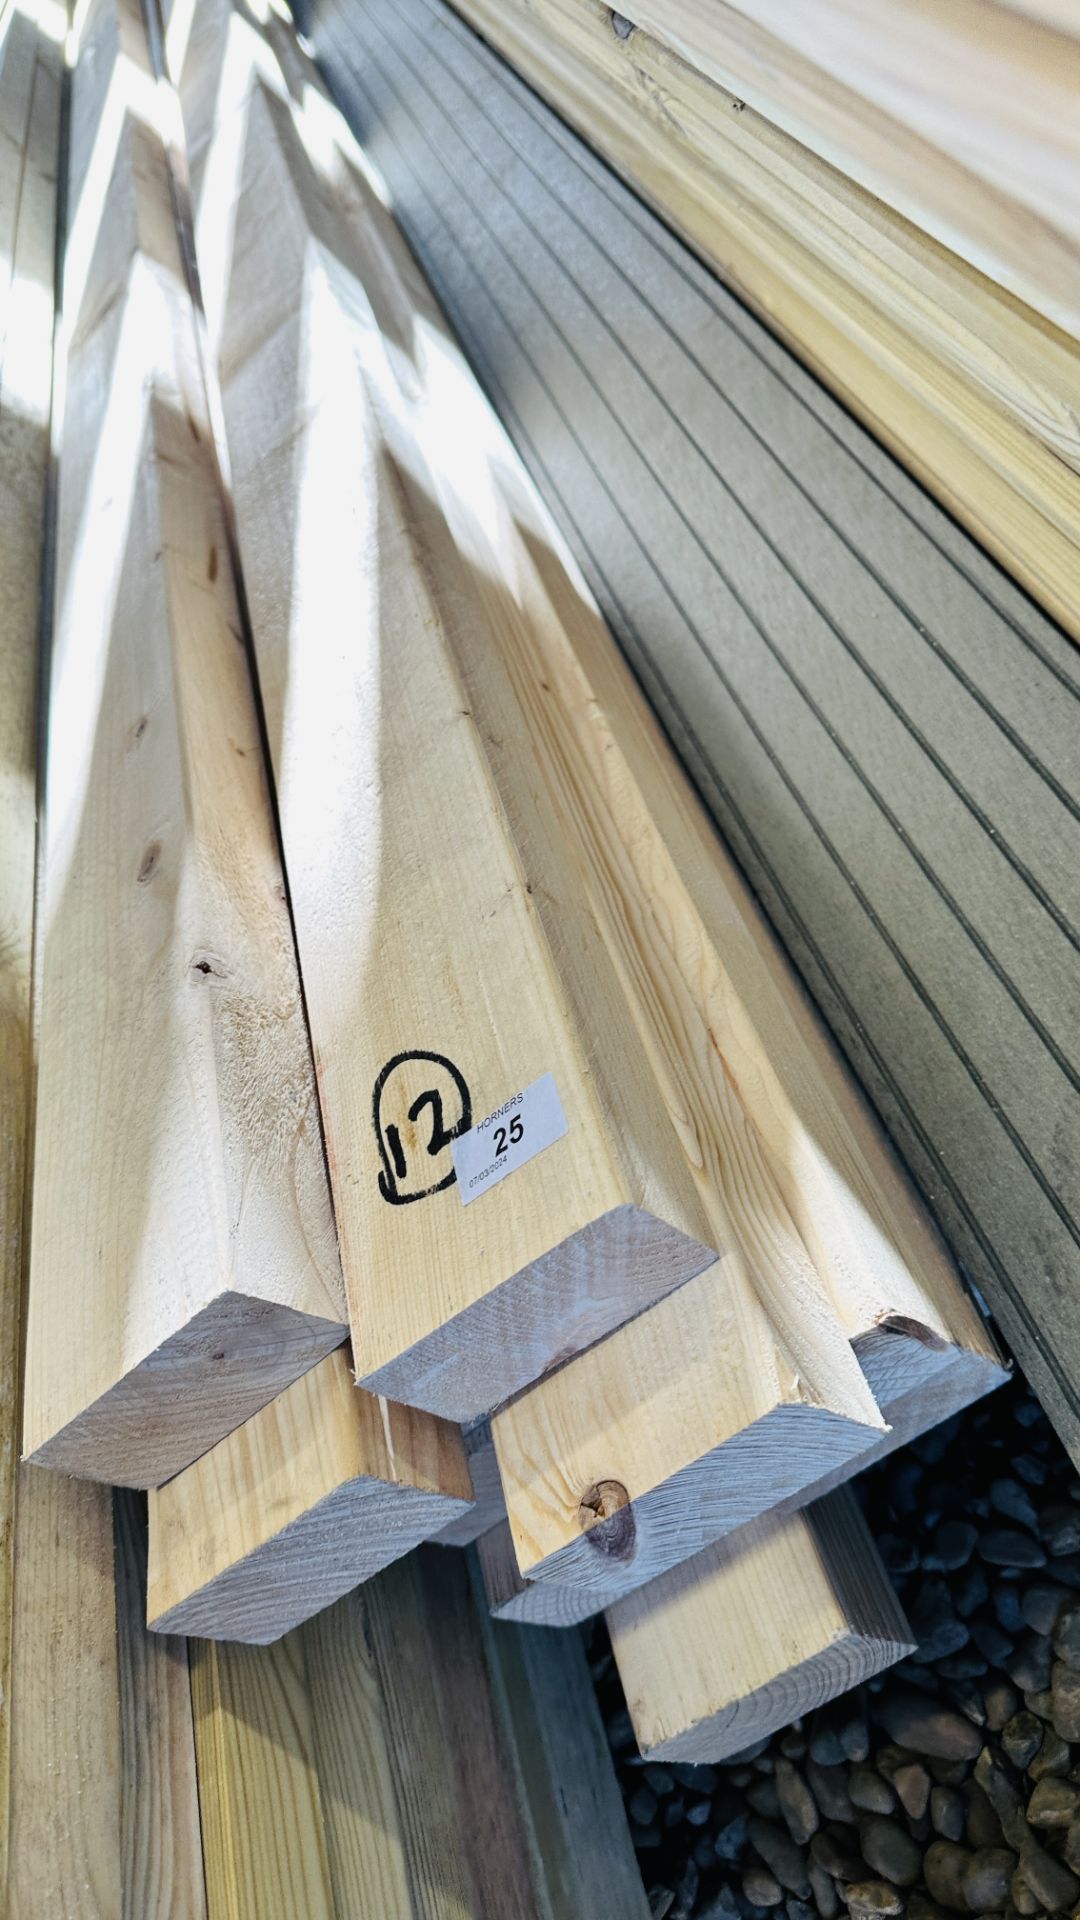 11 X 3 METRE LENGTHS 95MM X 45MM PLANED TIMBER. THIS LOT IS SUBJECT TO VAT ON HAMMER PRICE. - Bild 4 aus 4